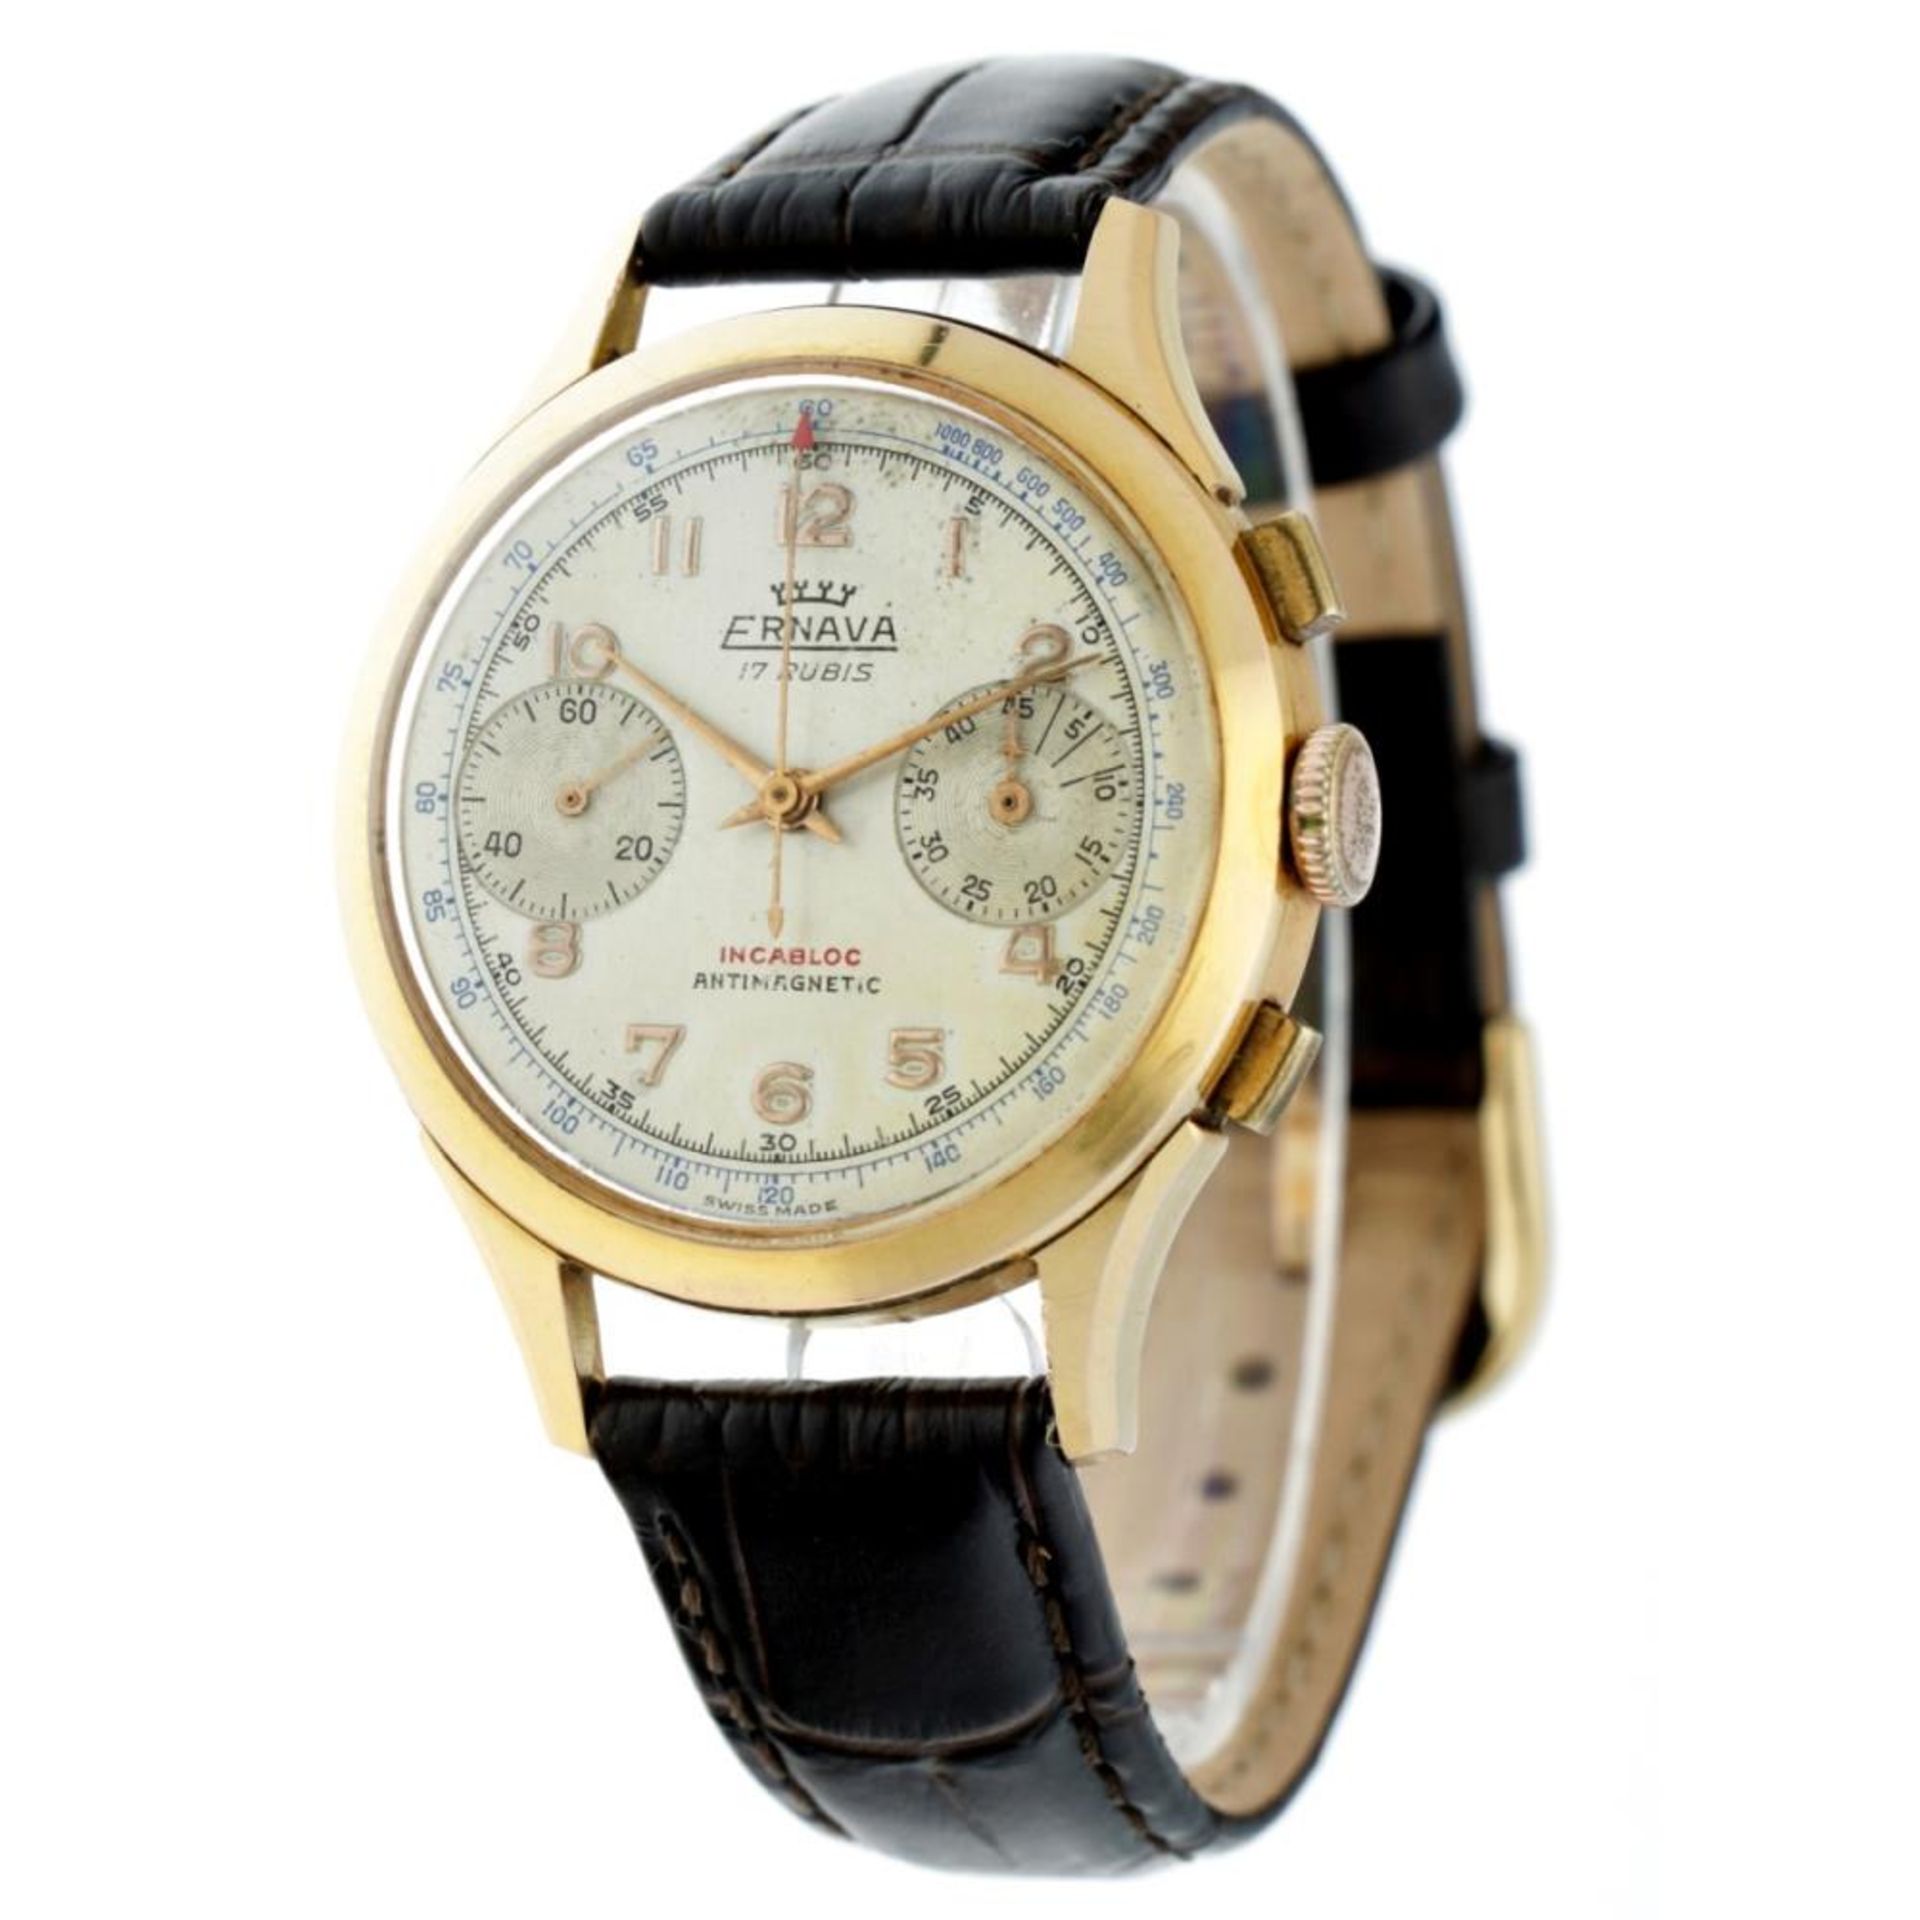 Ervana Chronograph 22083 - Men's watch - approx. 1950. - Image 3 of 12